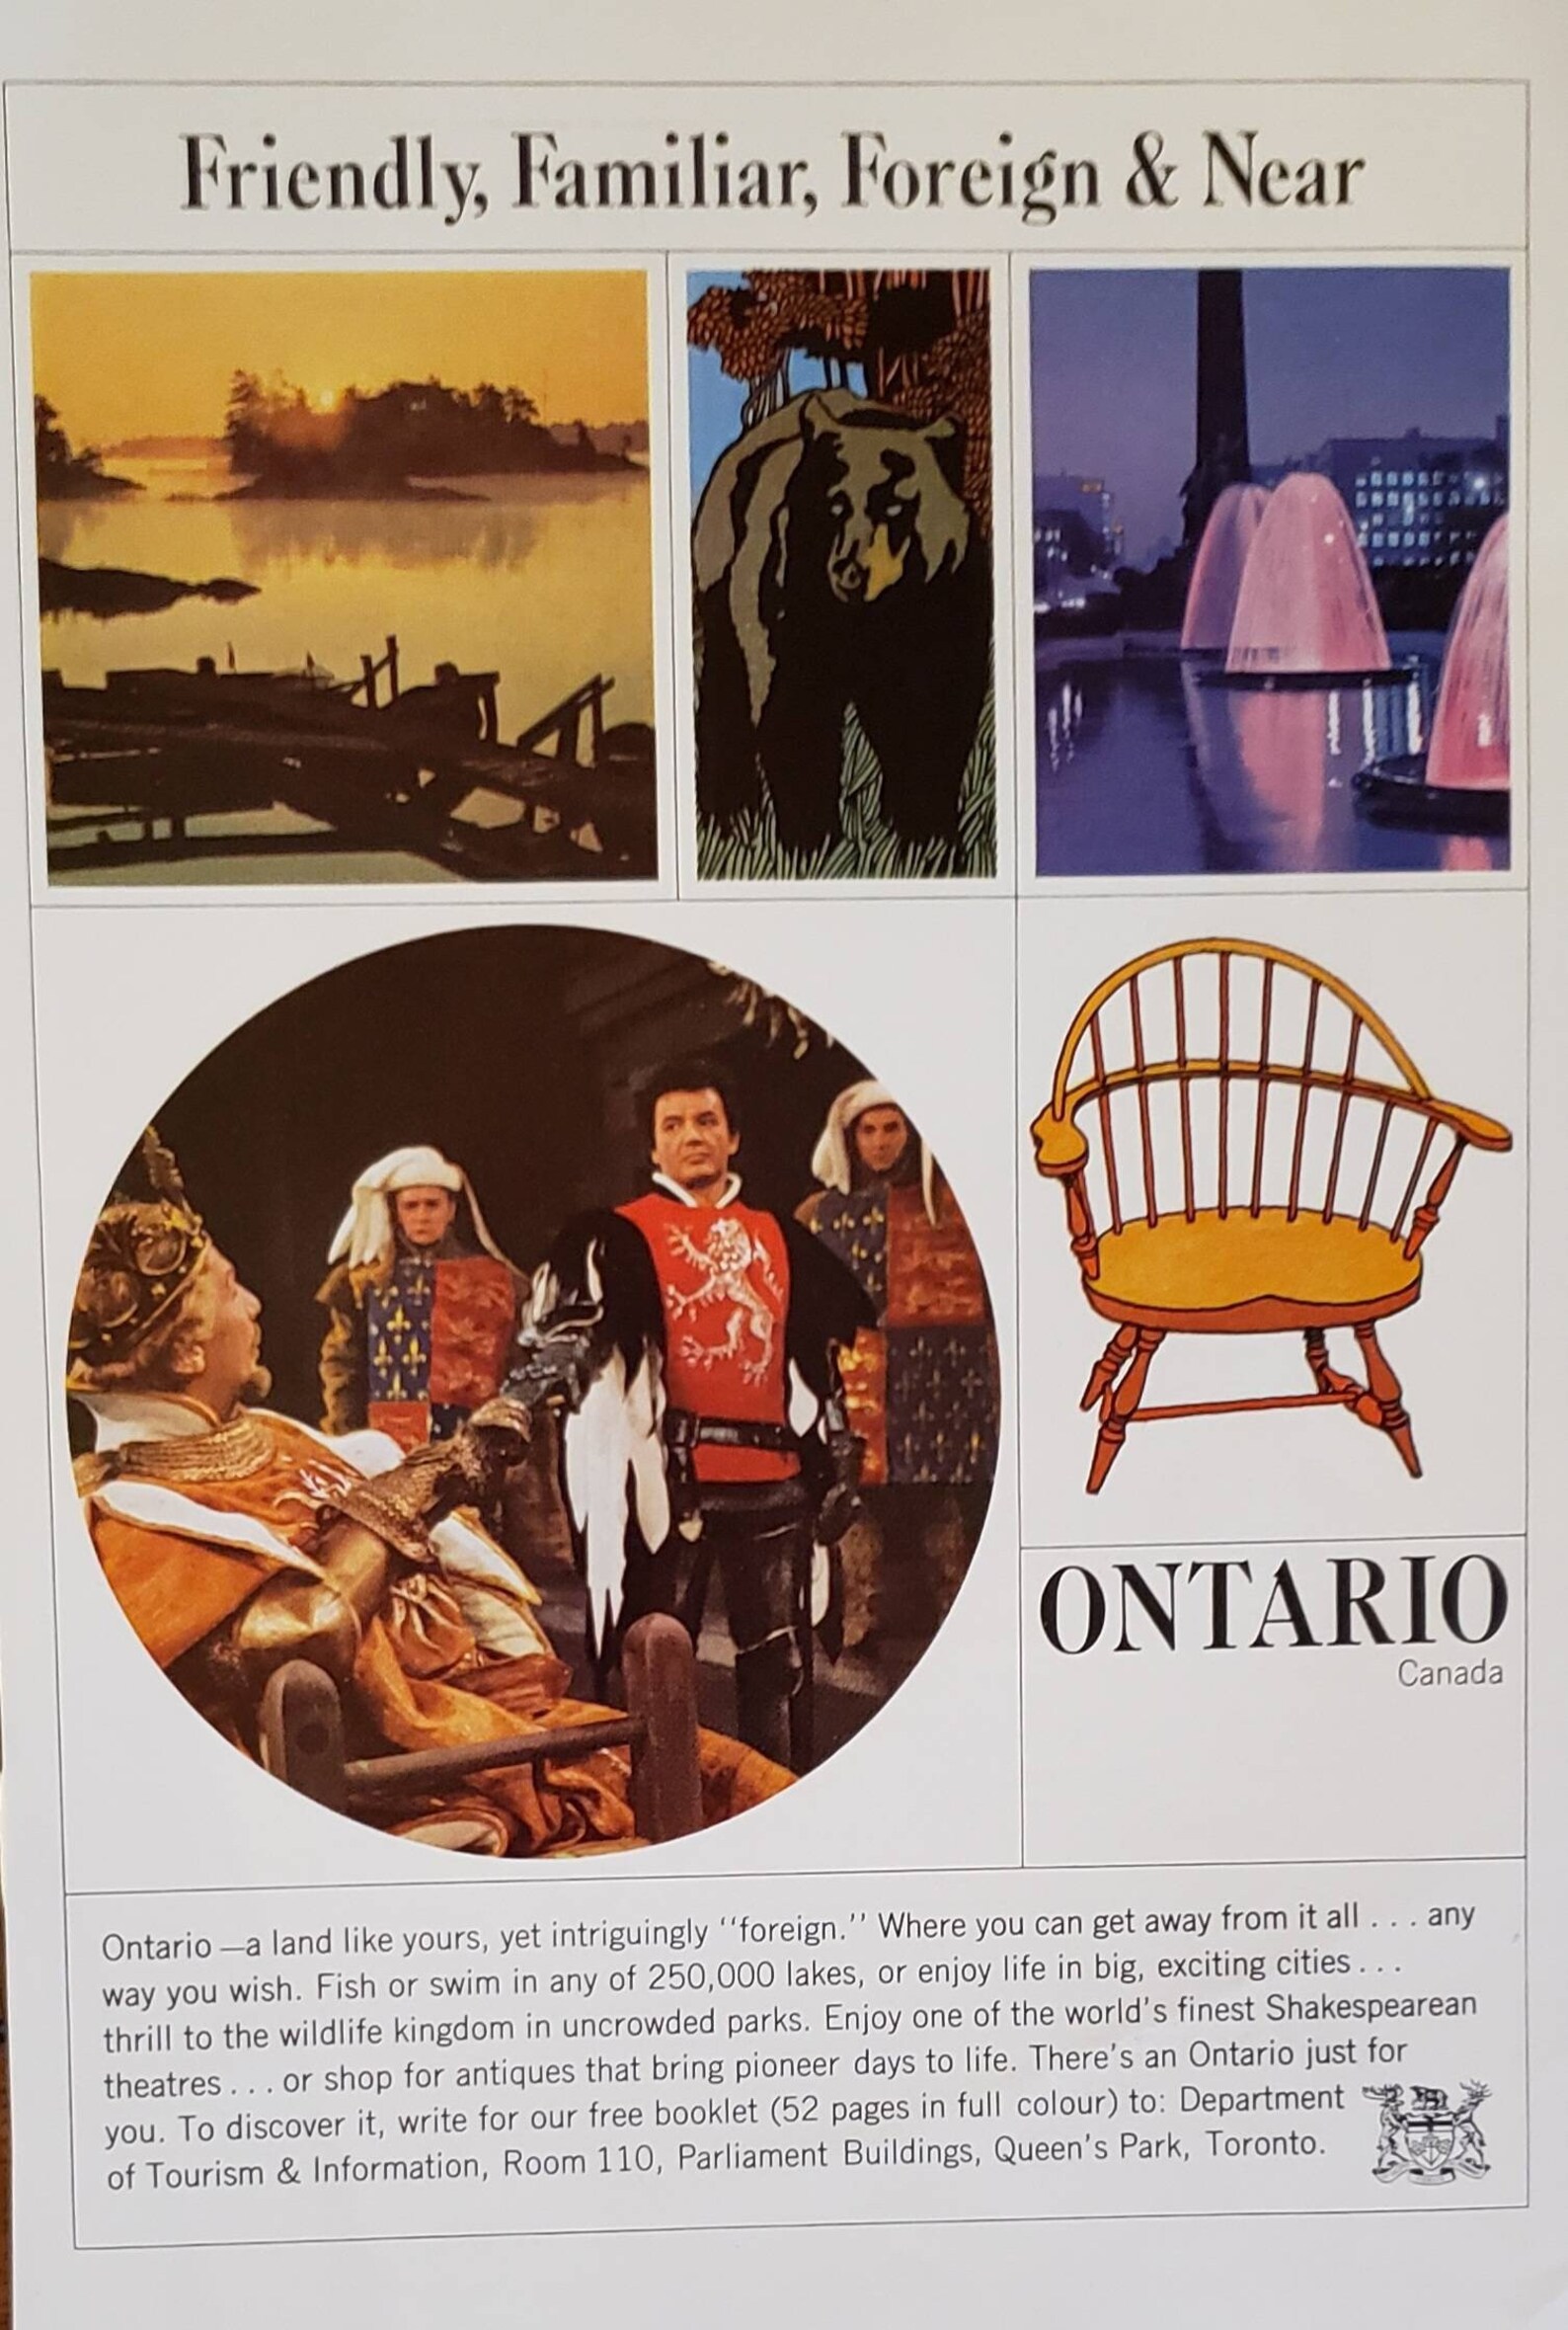 A vintage tourism ad which reads "Friendly, Familiar, Foreign and Near", "Ontario", followed by a paragraph describing "Ontario, a land like yours, yet intriguingly 'foreign'". It describes Ontario's wild, its world-class Shakespearean theatre, its antique shopping, and uncrowded parks and features pictures of each, as well as an antique wooden chair. 